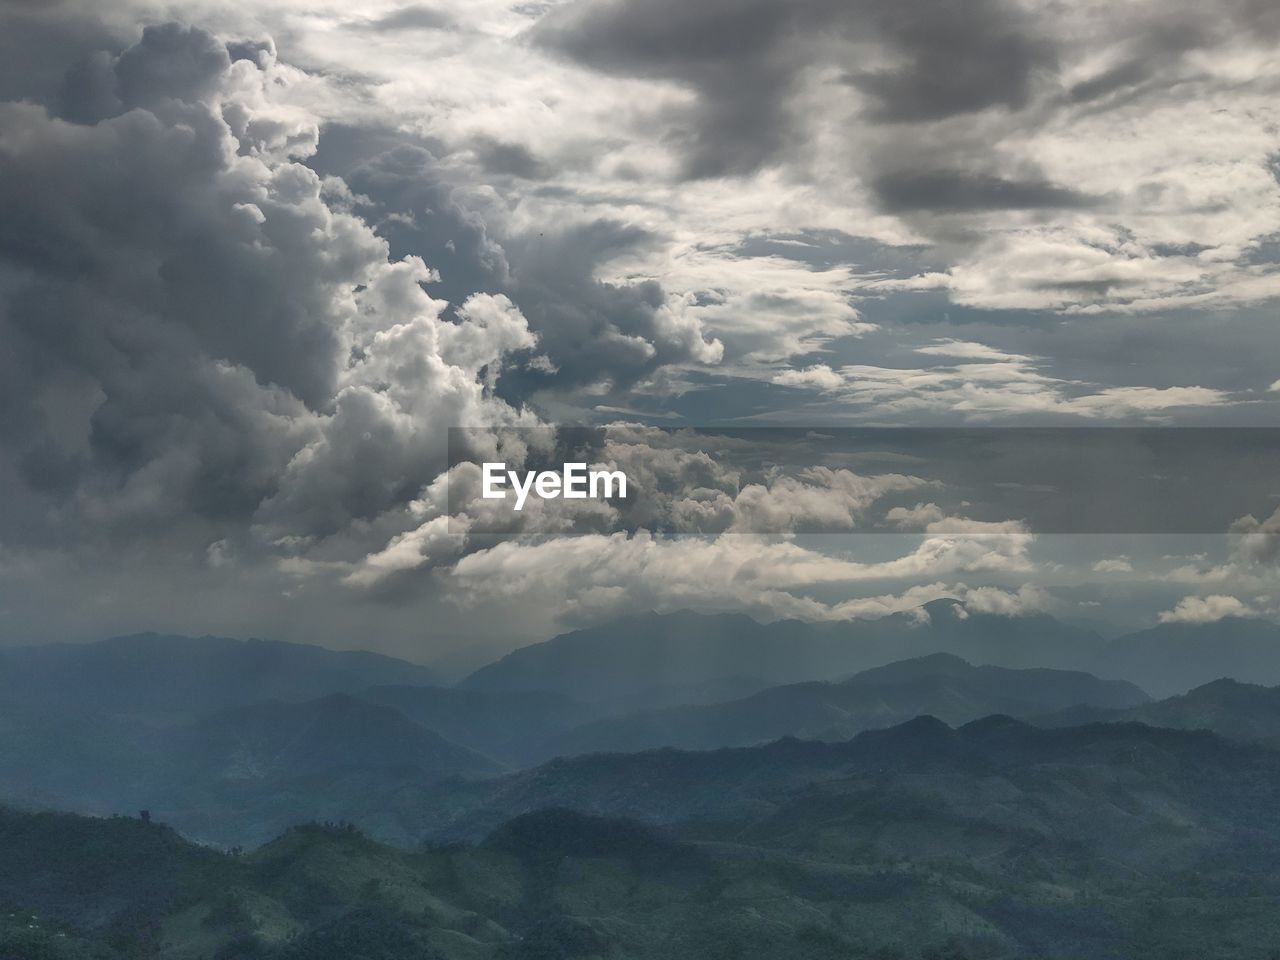 SCENIC VIEW OF CLOUDS OVER MOUNTAINS AGAINST SKY